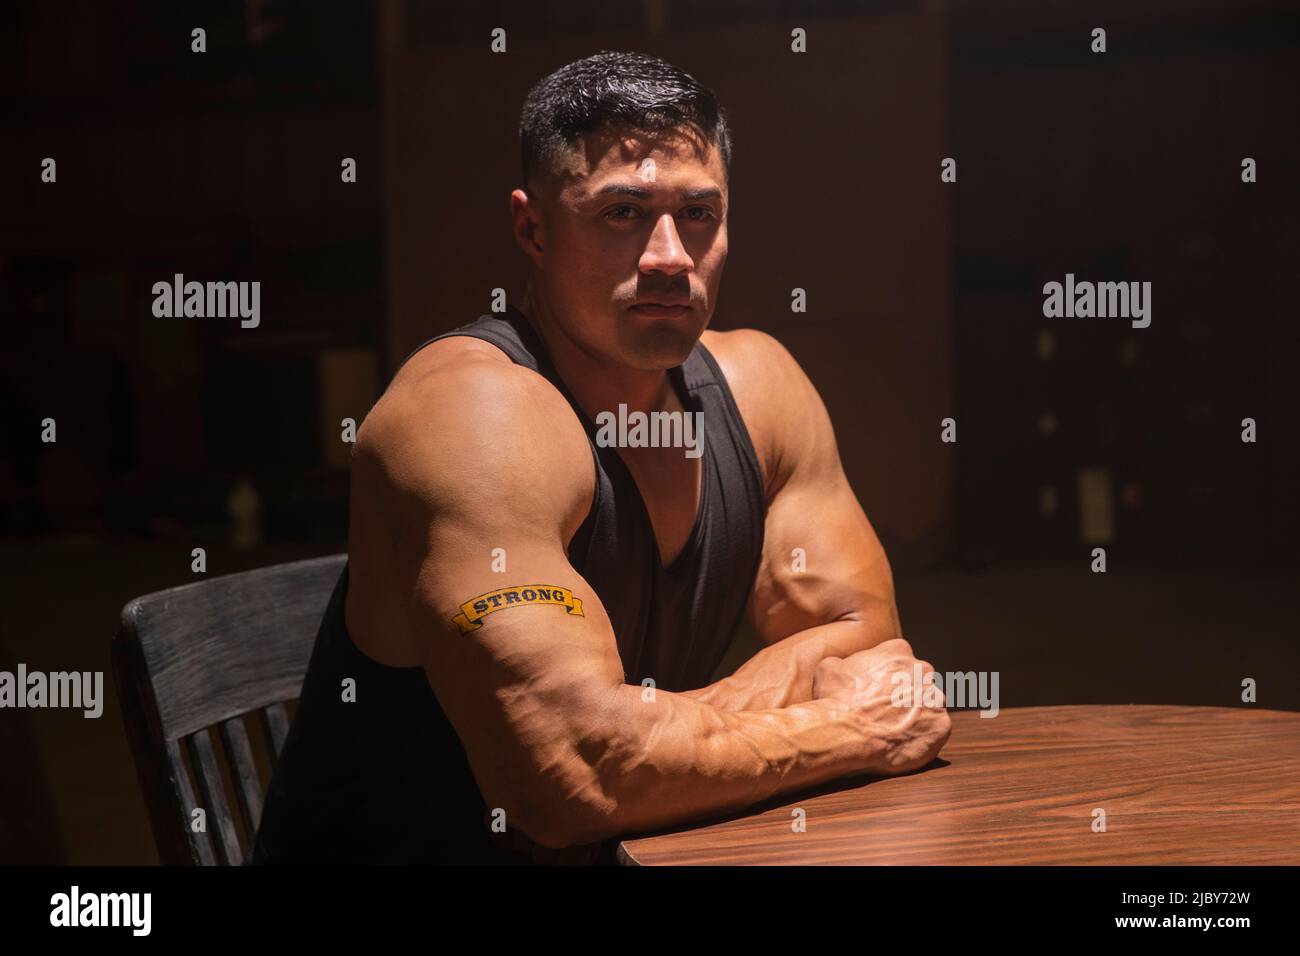 Muscular Hispanic man wearing tank top with “Strong” tattoo on his